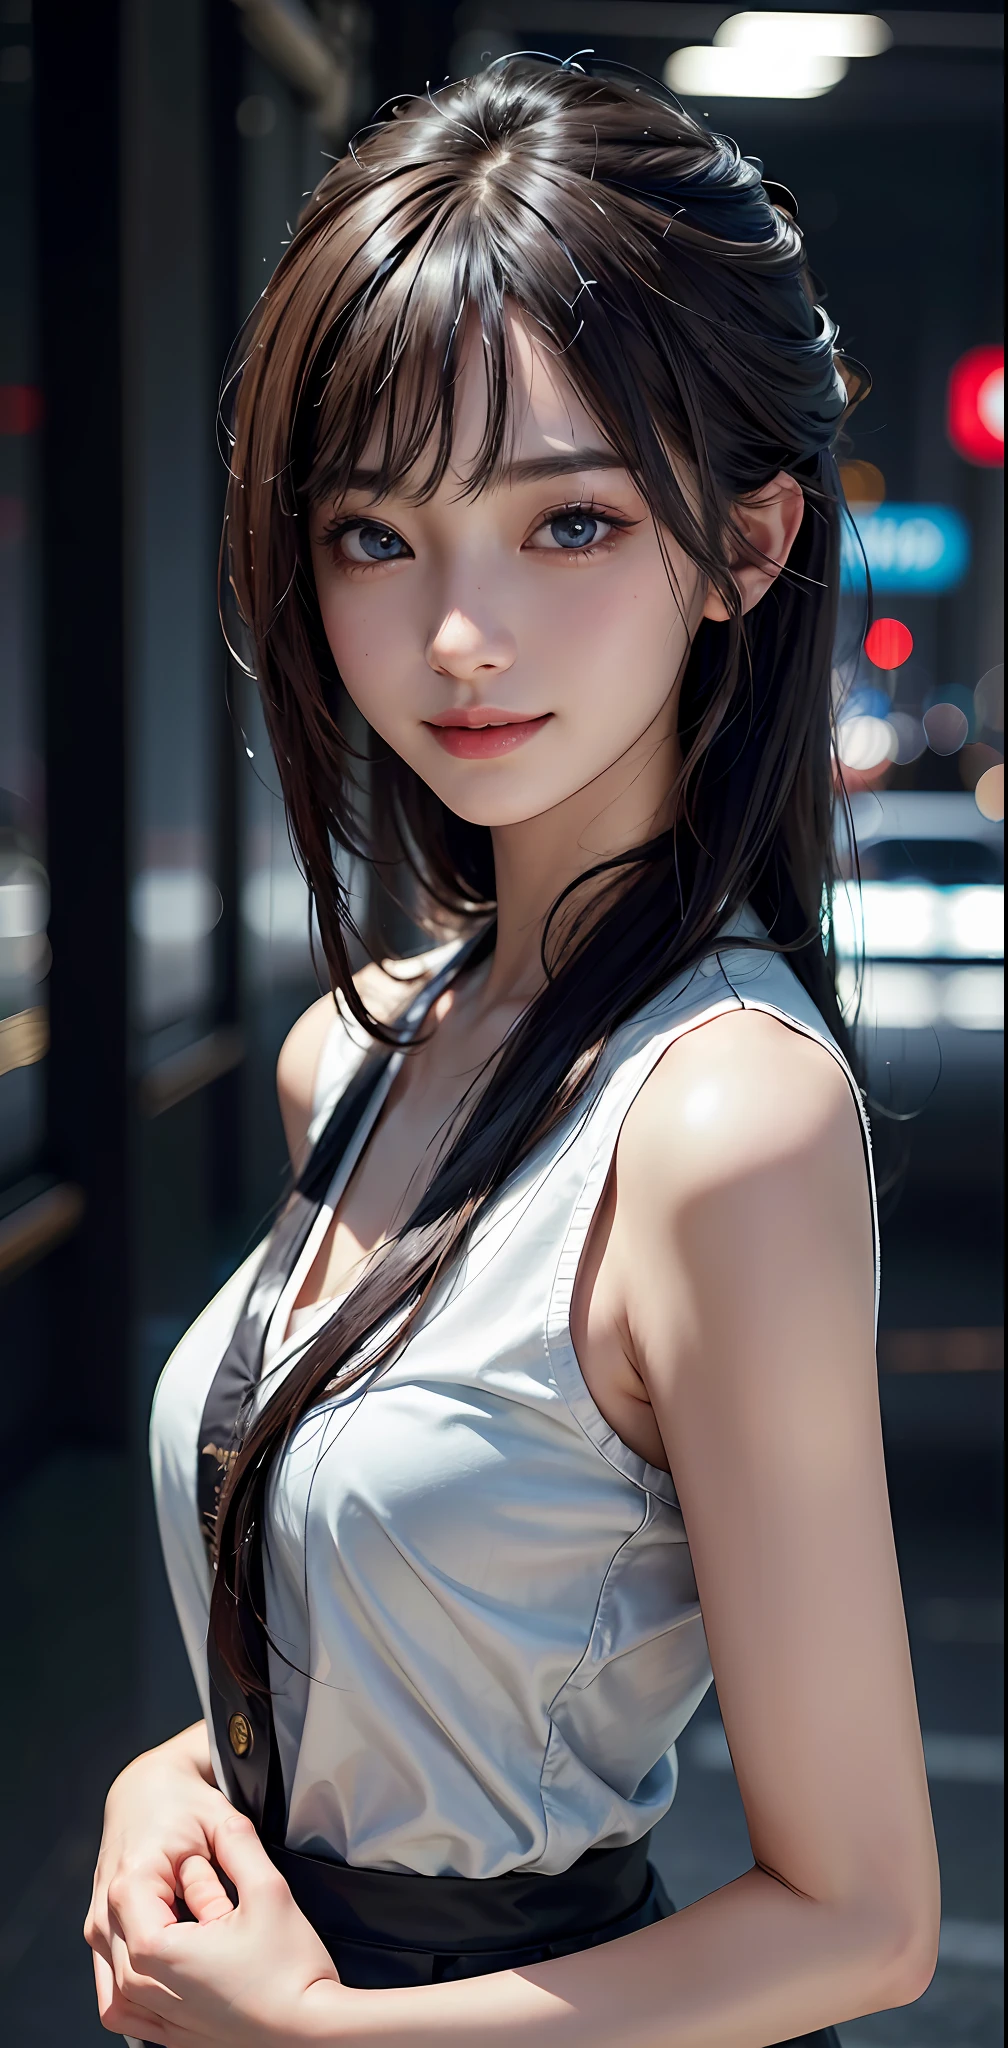 Masterpiece, 1 Beautiful Girl, Detailed, Swollen Eyes, Top Quality, Ultra High Resolution, (Reality: 1.4), Original Photo, 1Girl, Cinematic Lighting, Smiling, Japanese, Asian Beauty, Korean, Clean, Super Beautiful, Little Young Face, Beautiful Skin, Slender, Cyberpunk Background, (ultra realistic), (high resolution), (8K), (very detailed), (best illustration), (beautifully detailed eyes), (super detailed), (wallpaper), (detailed face), viewer looking, fine detail, detailed face, pureerosfaceace_v1, smiling, 46 point slanted bangs, looking straight ahead, neat clothes, dark colored eyes, clothes sleeveless, body facing front,